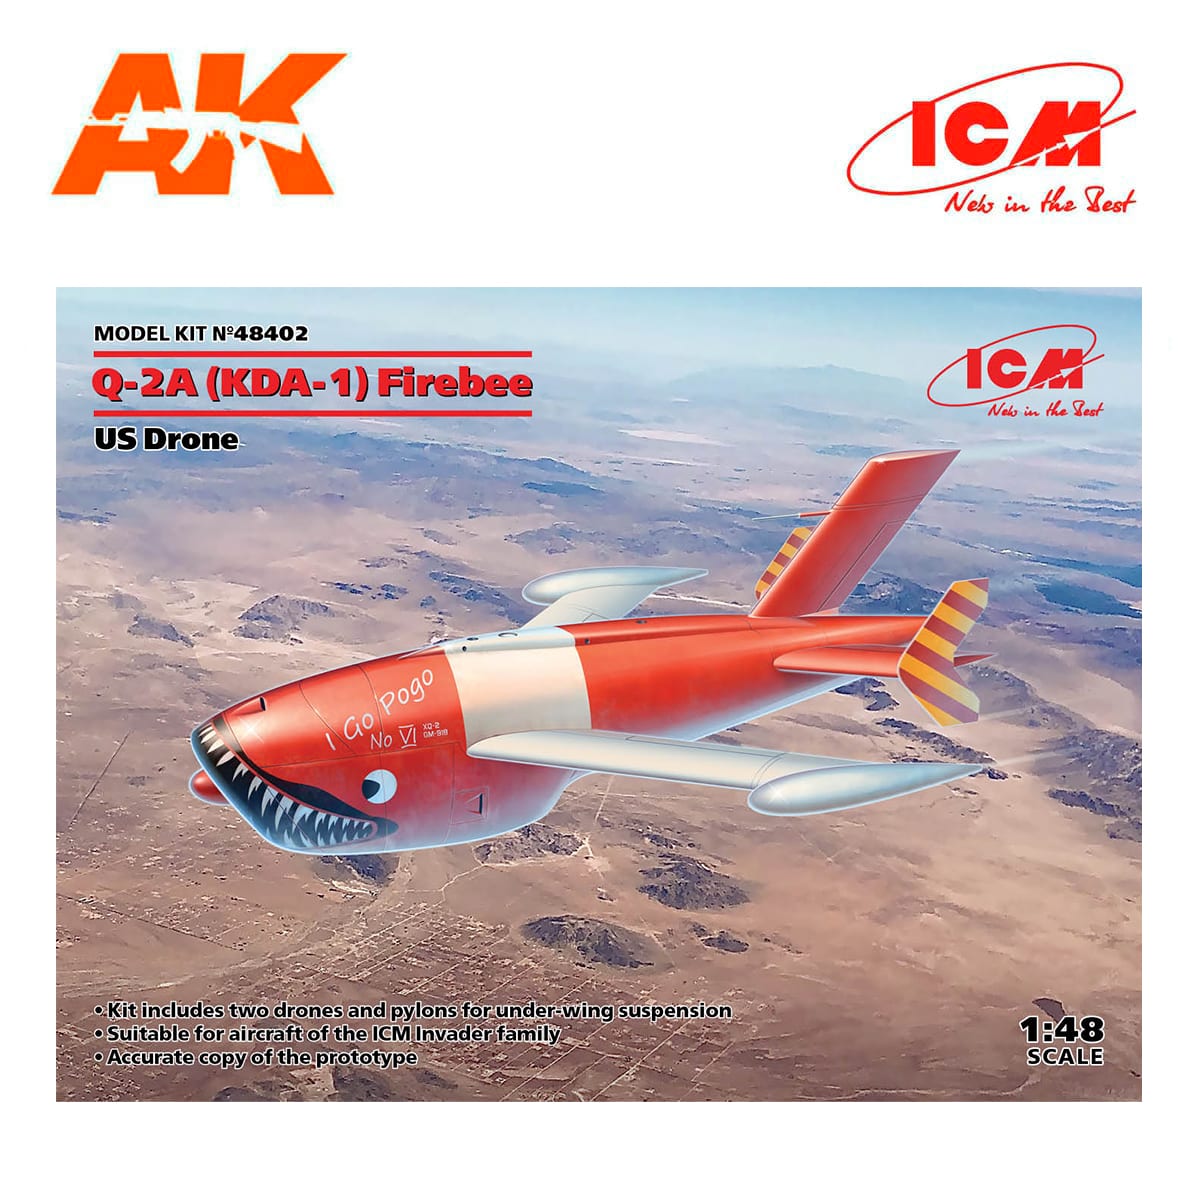 Q-2A (XM-21, KDA-1) Firebee, US Drone (2 airplanes and pilons) (100% new molds) 1/48